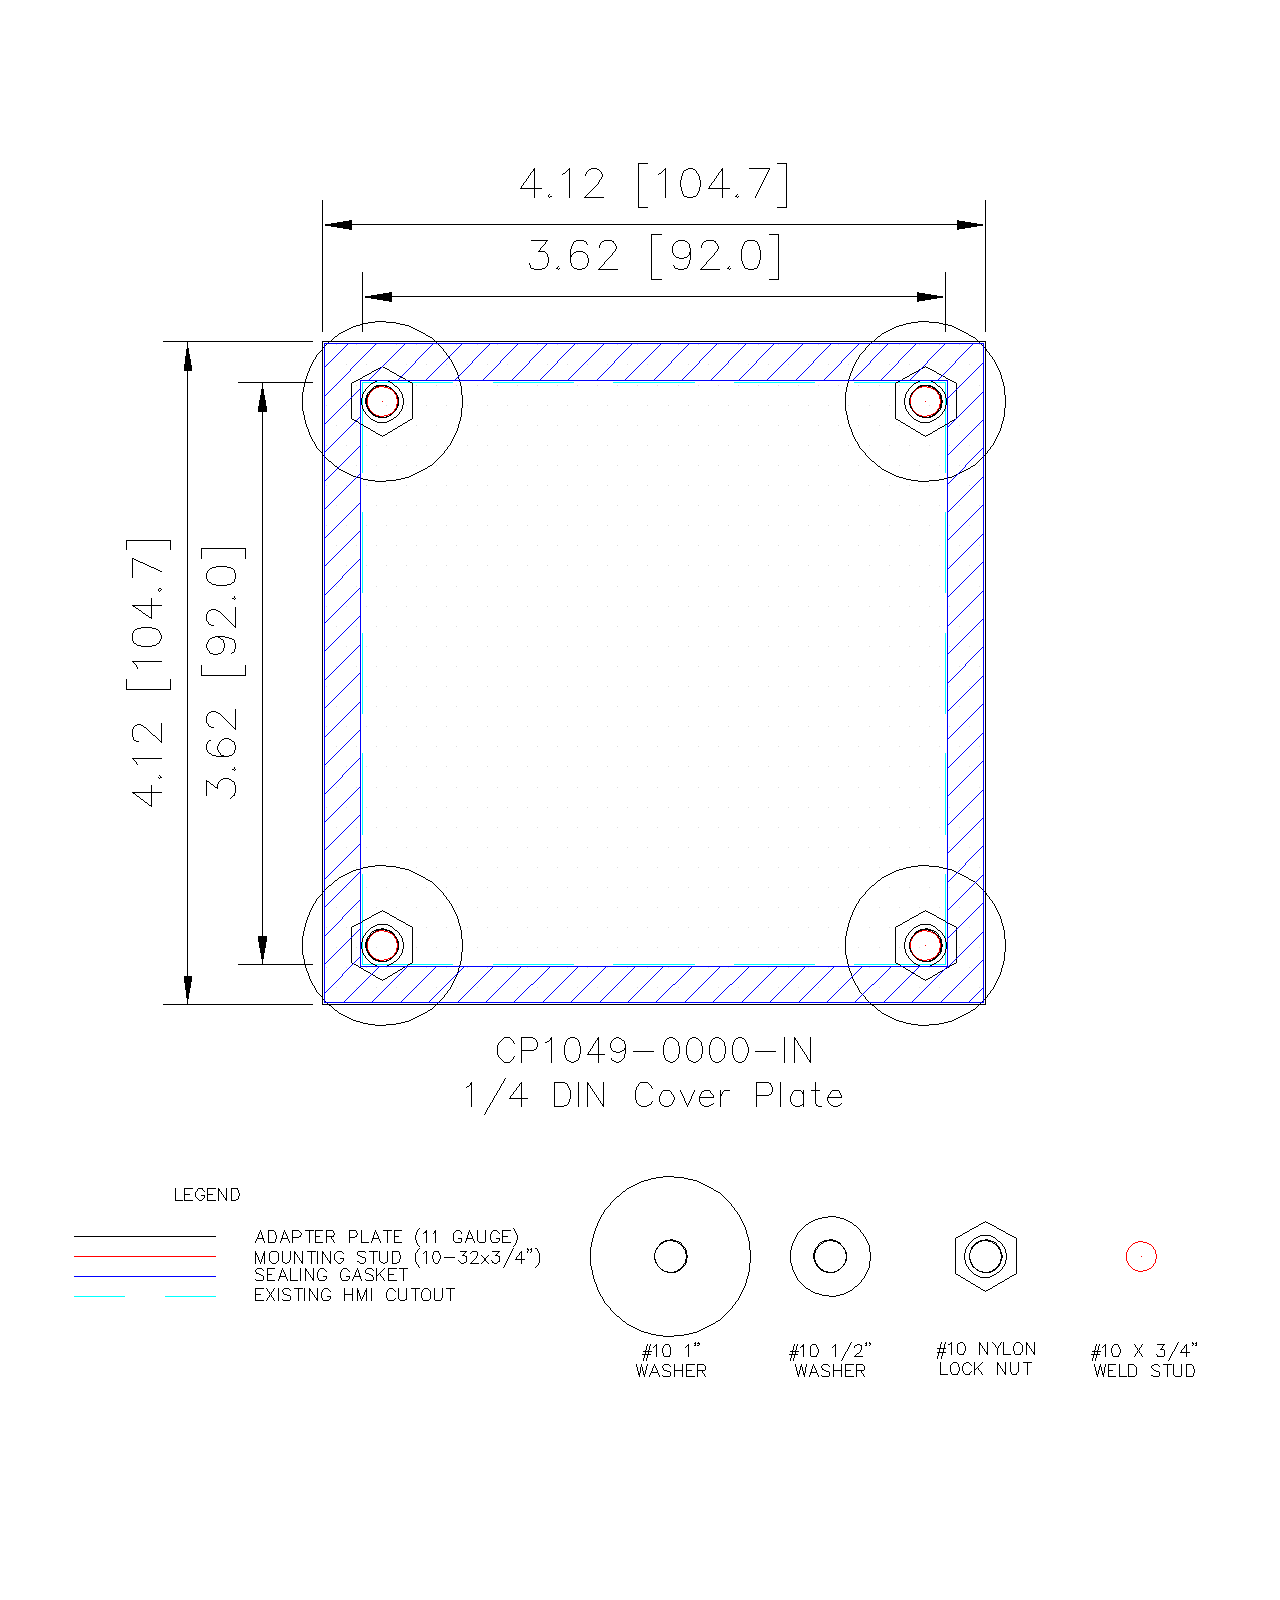 Cover Plate - 1/4 DIN